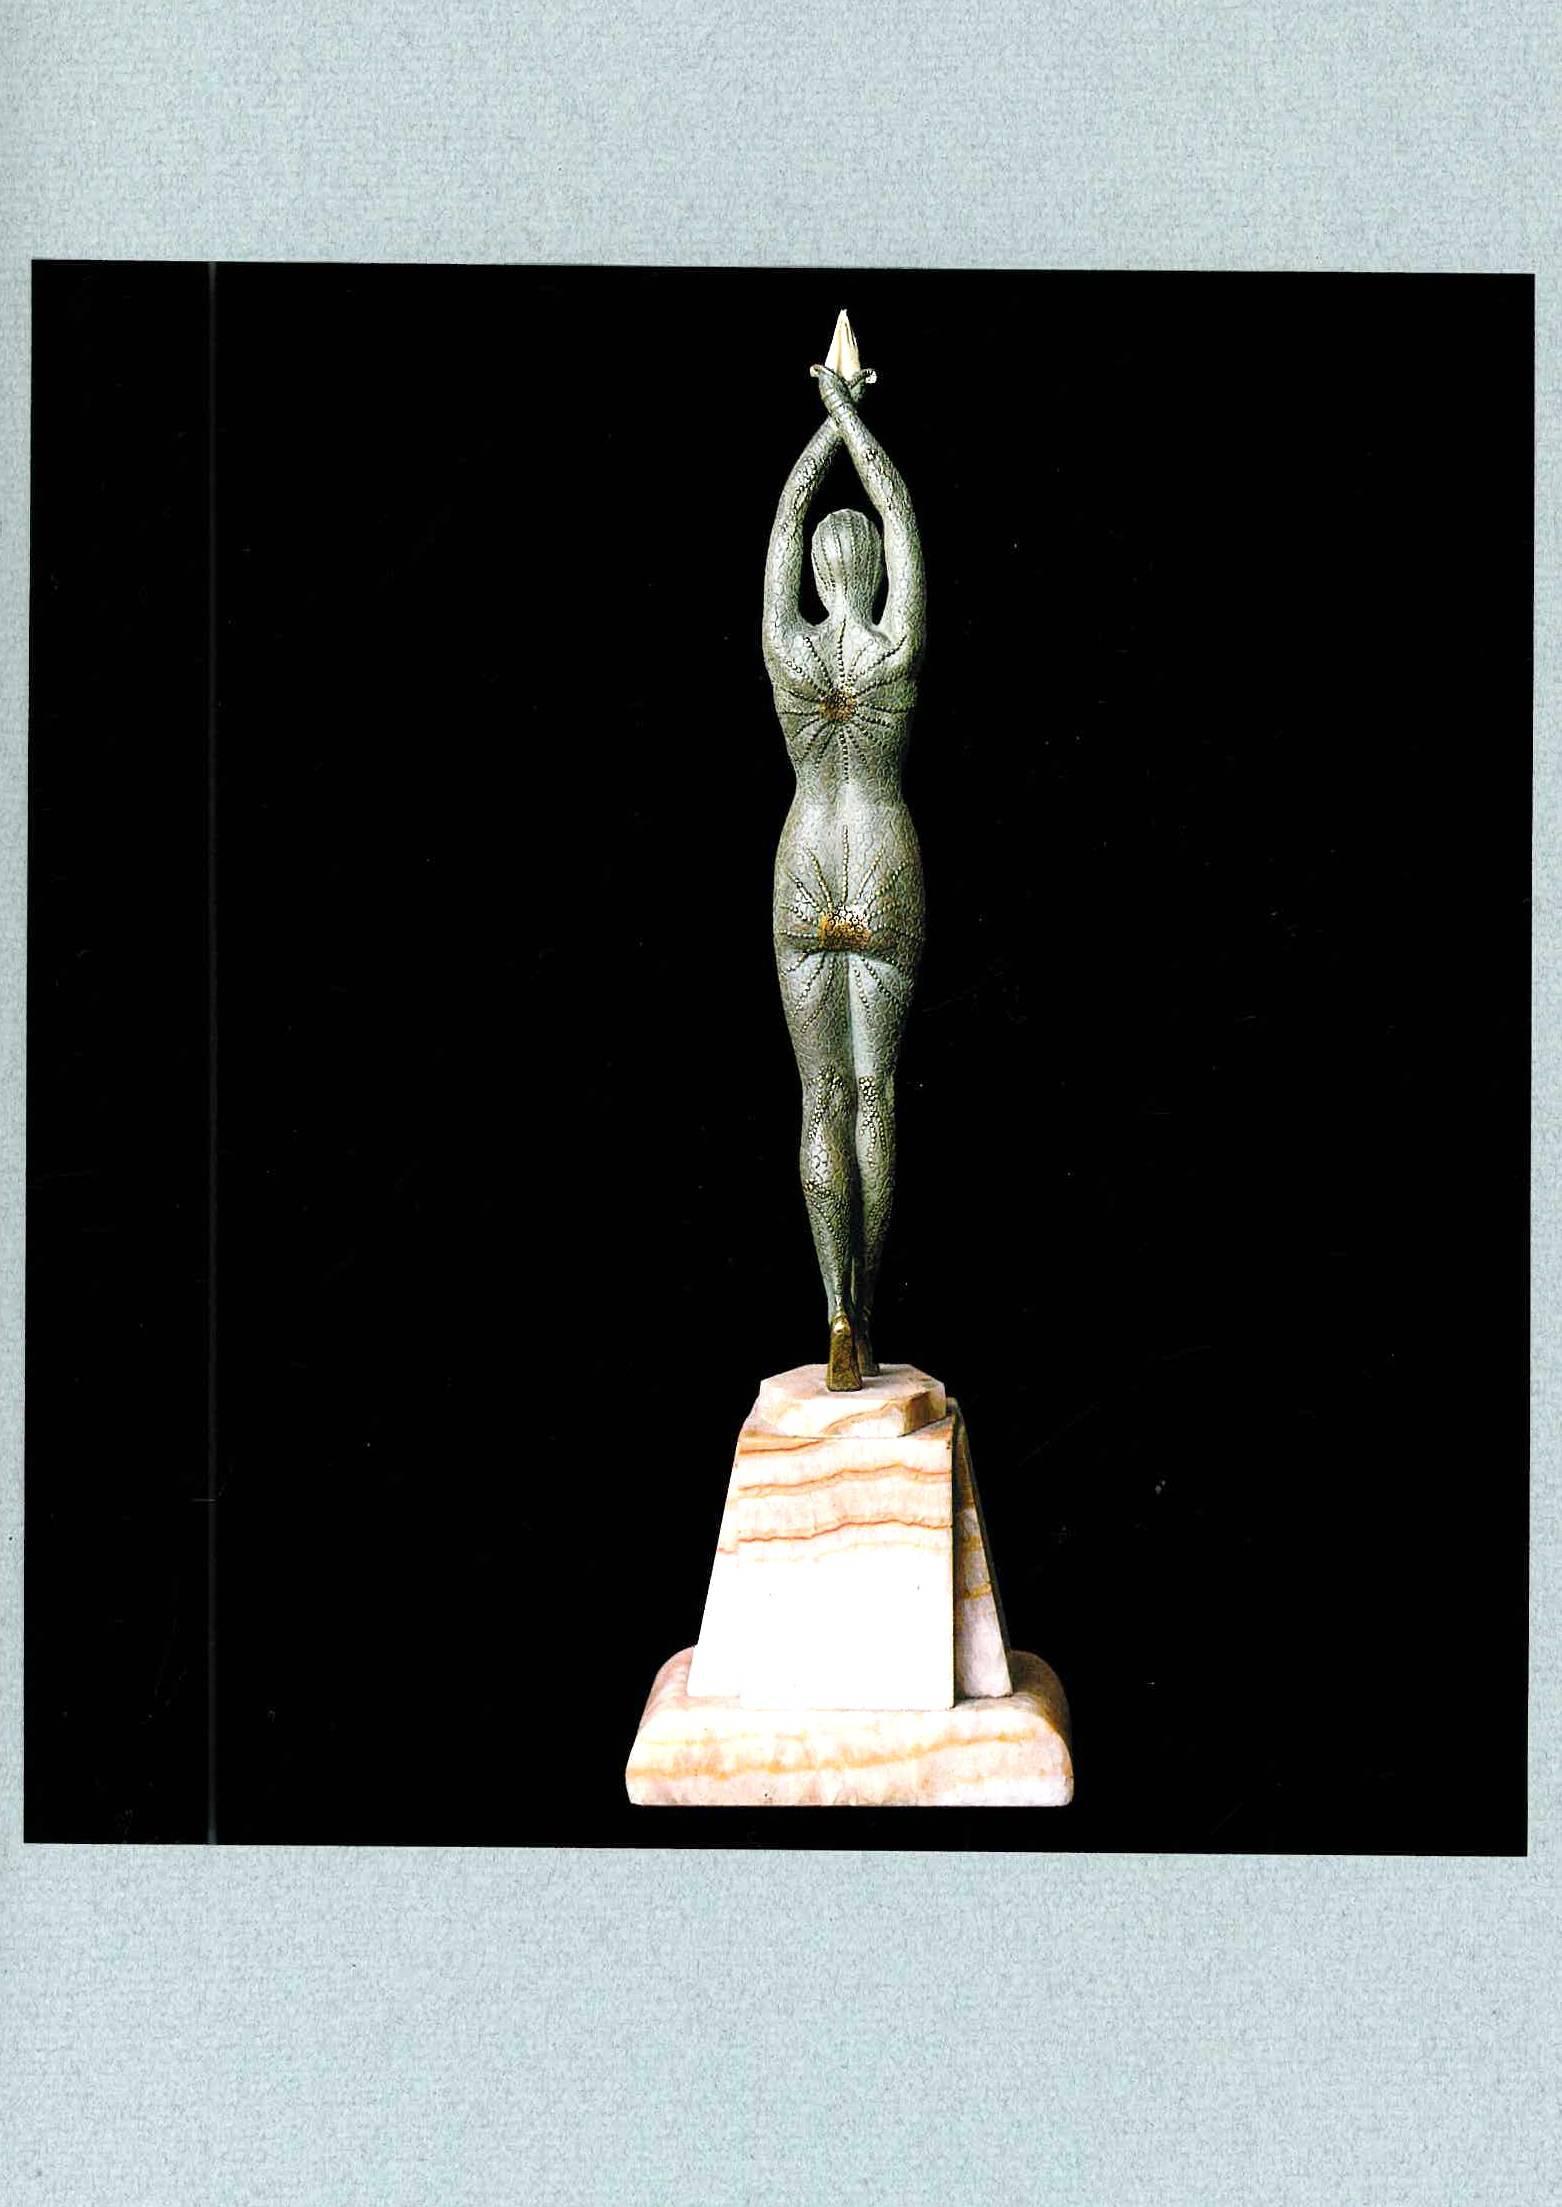 20th Century Isadora Duncan with Art Deco Sculptures by Chiparus, Preiss and Others (Book) For Sale